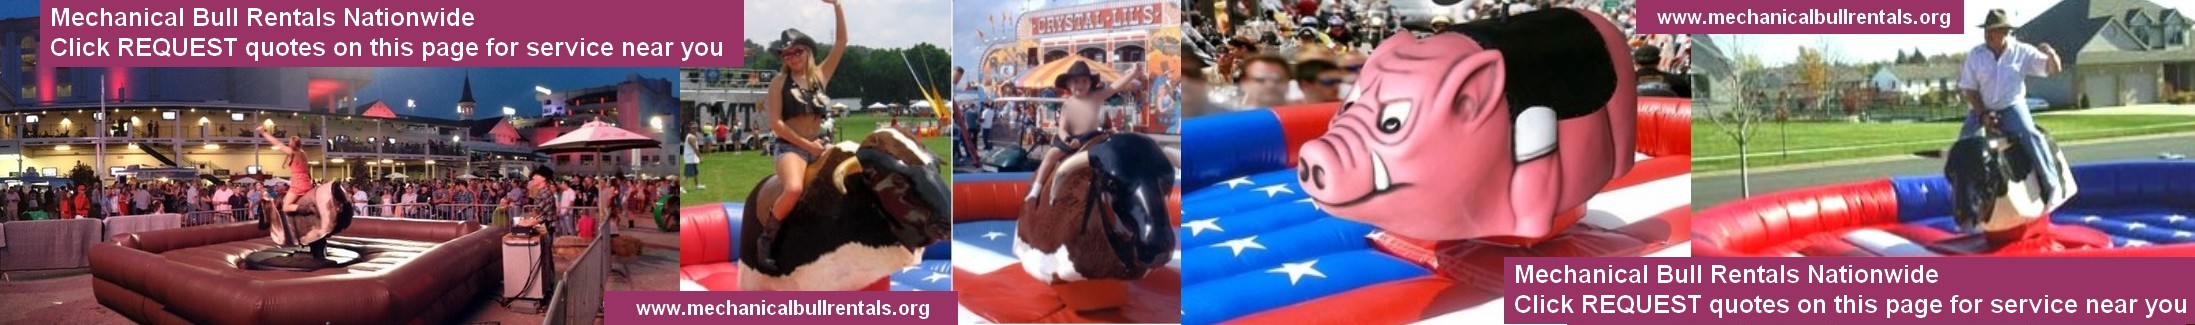 Mechanical Bull Rentals Albany New York NY and near you. Free referrals to local mechanical bull companies LOGO